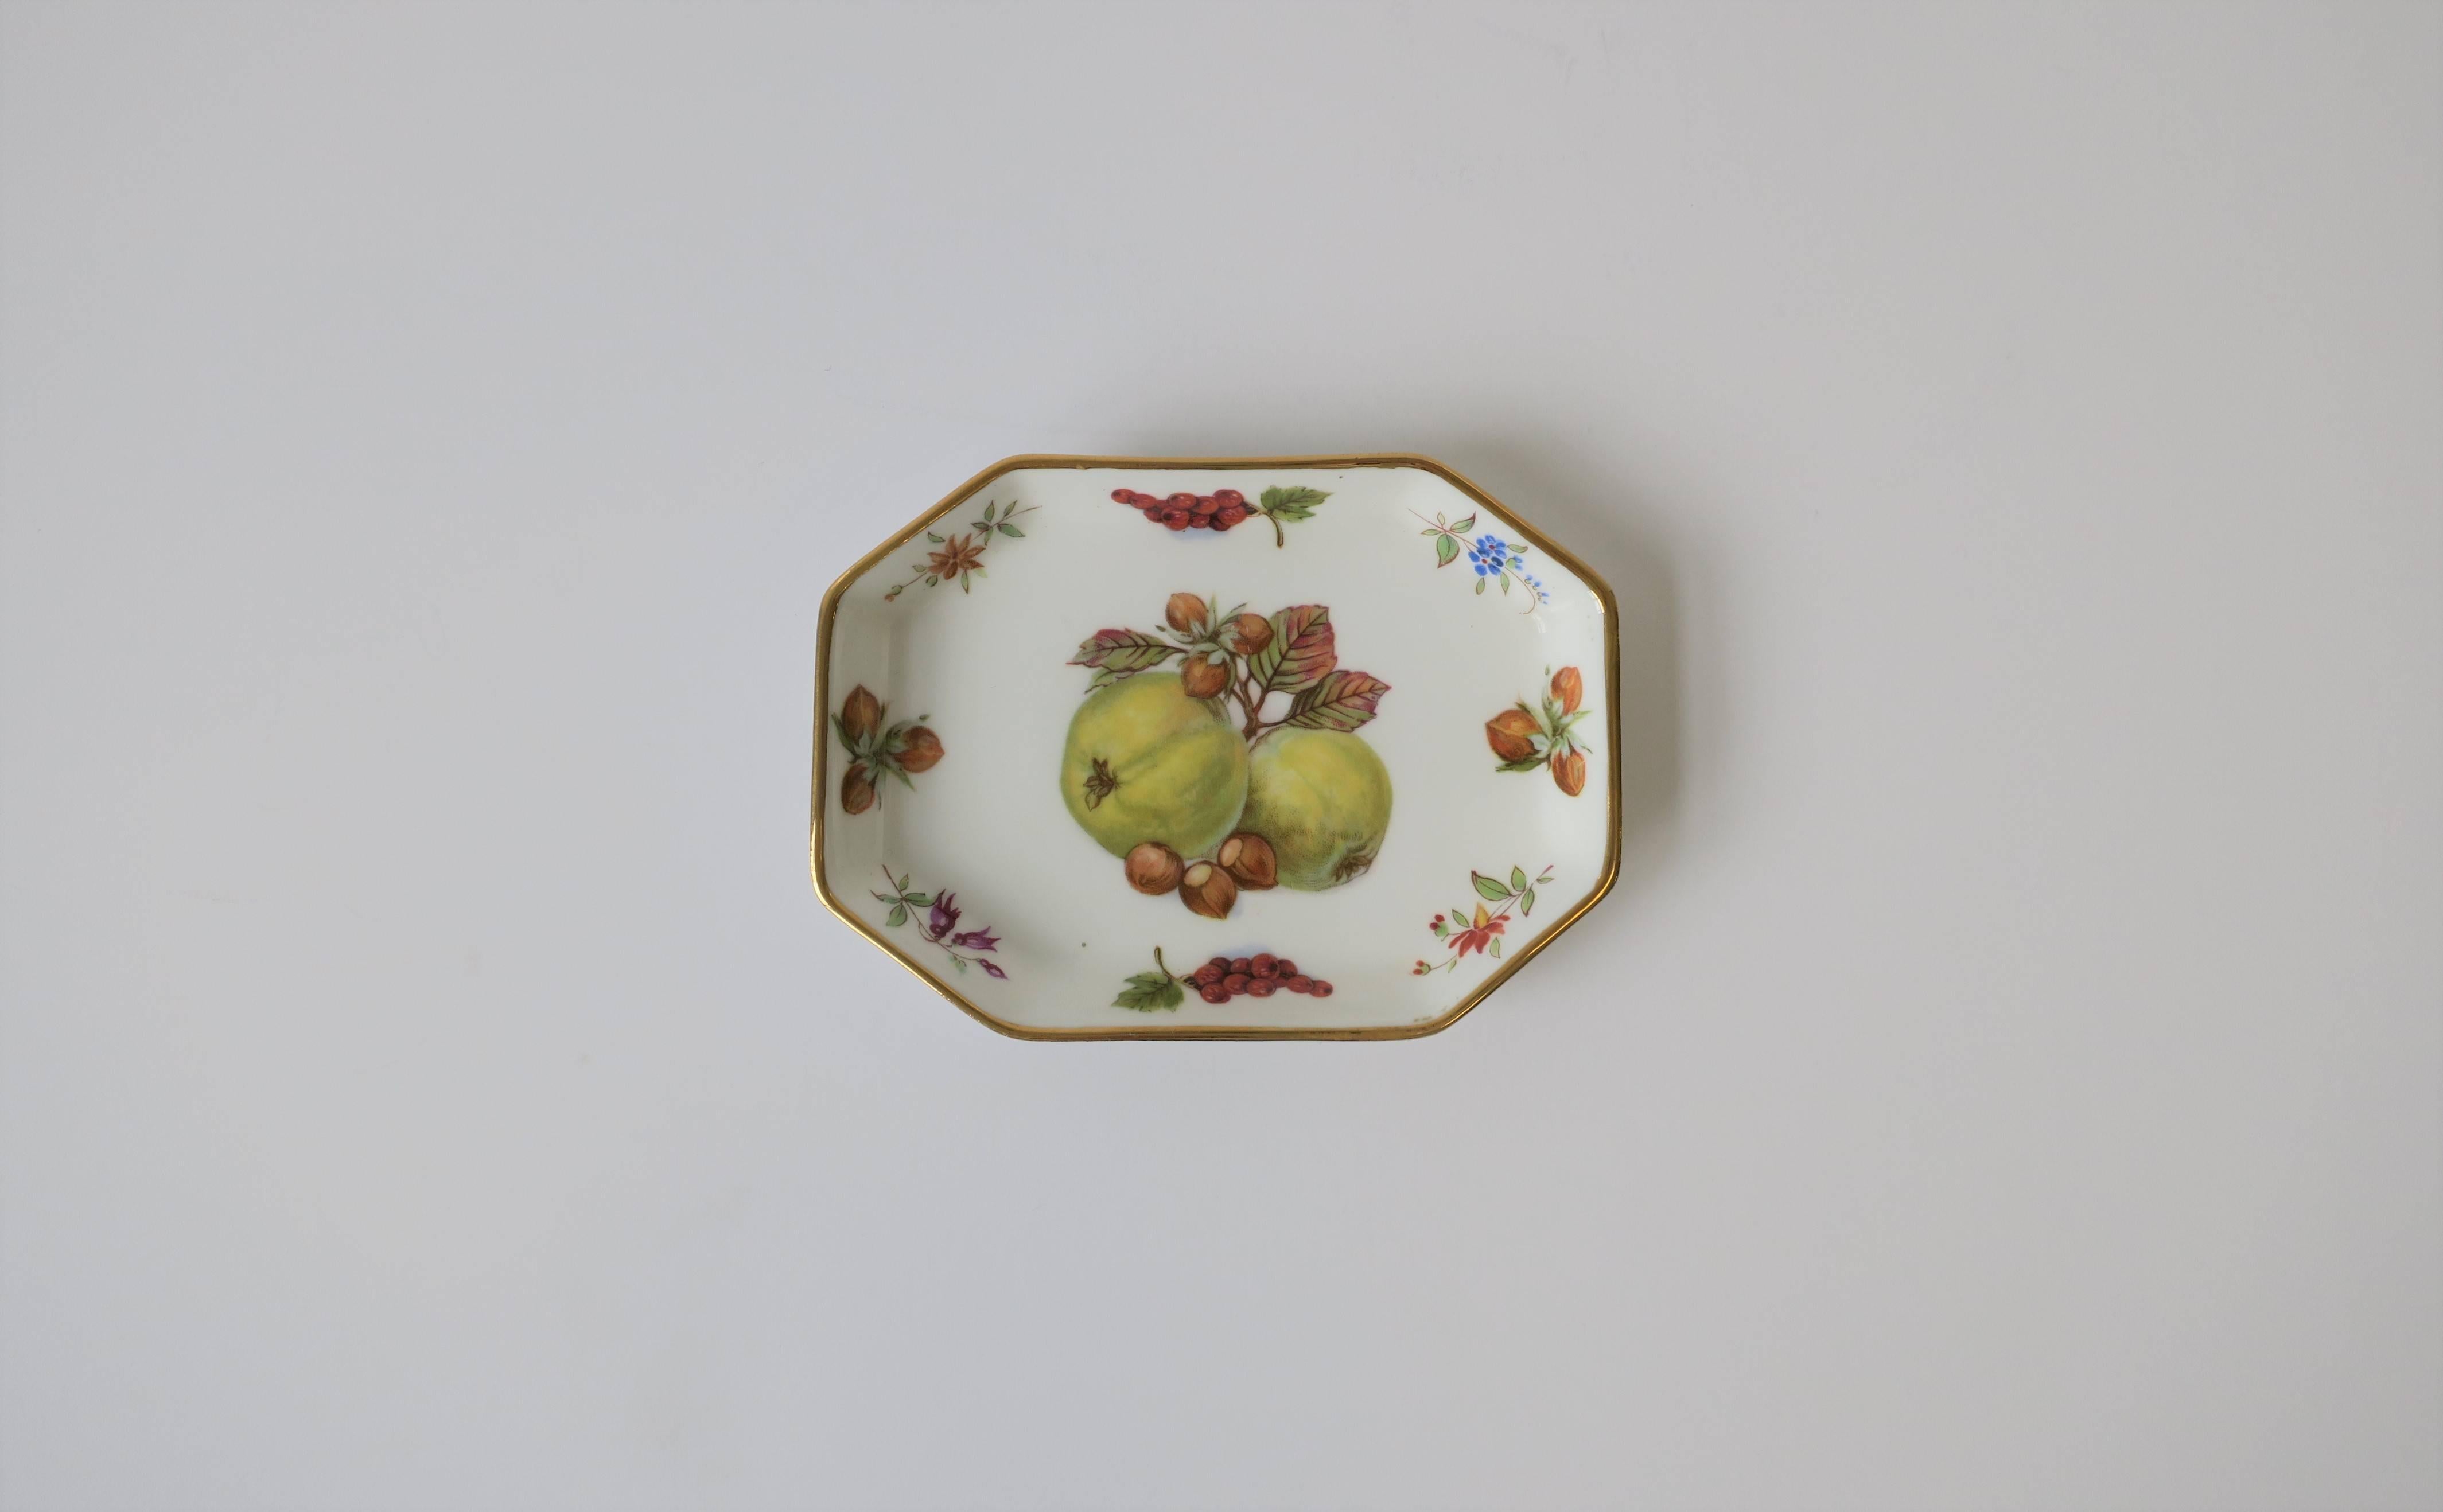 A beautiful English fine bone china porcelain octagonal trinket or jewelry dish with fruit design and gold detail around edge, by Hammersley, England, circa 20th century. Makers' mark on bottom as show in image last image. A great piece for a desk,